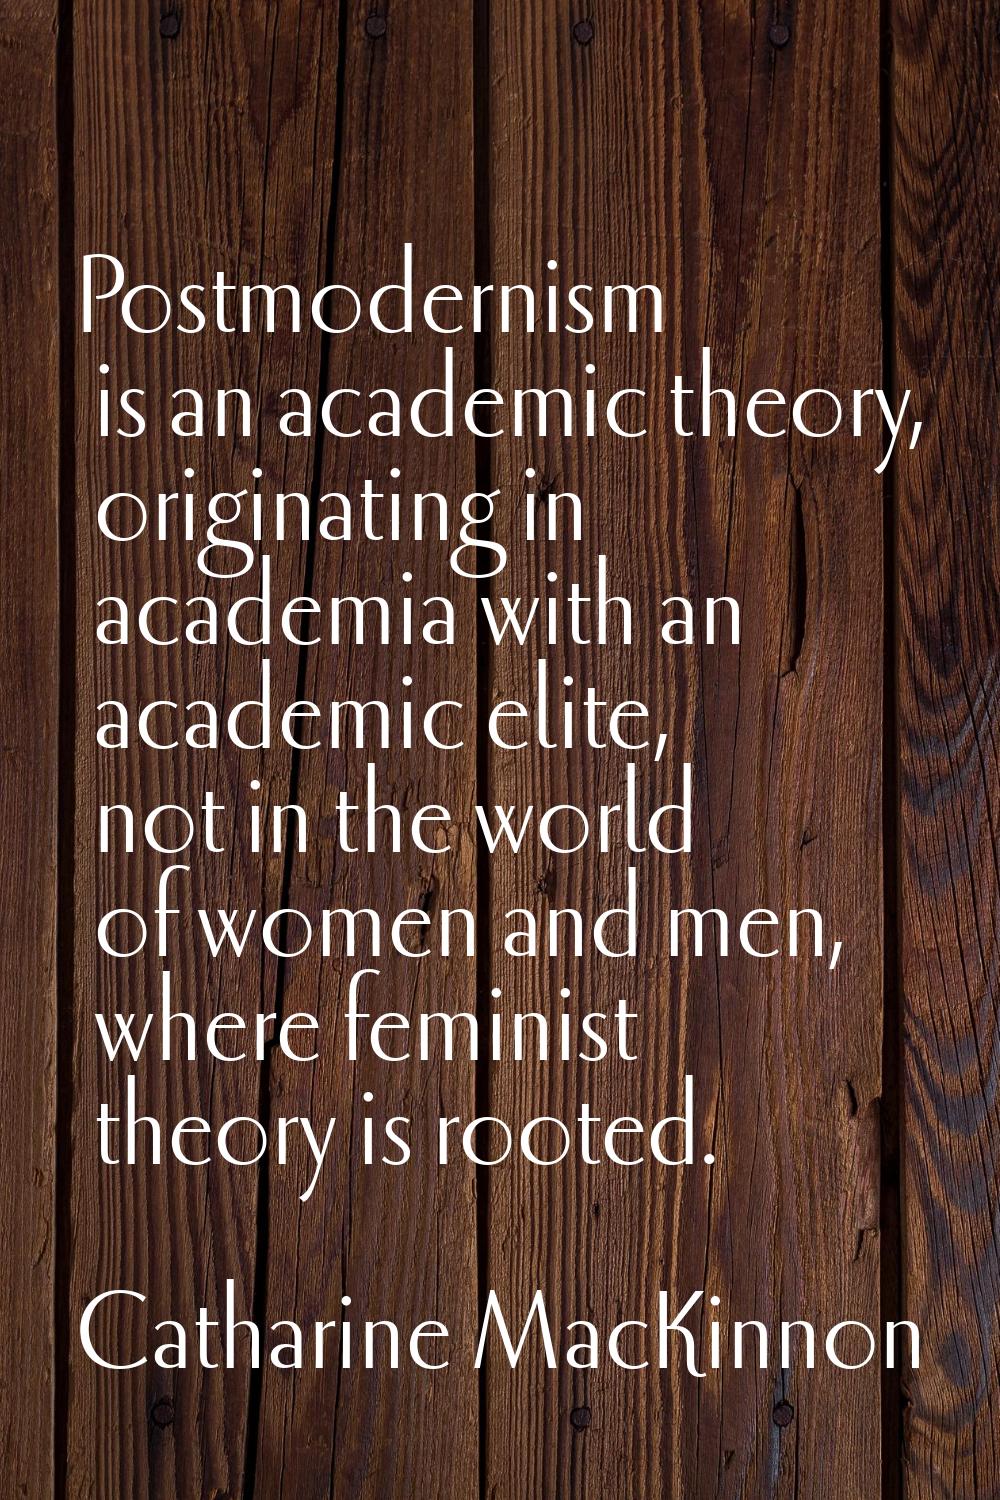 Postmodernism is an academic theory, originating in academia with an academic elite, not in the wor